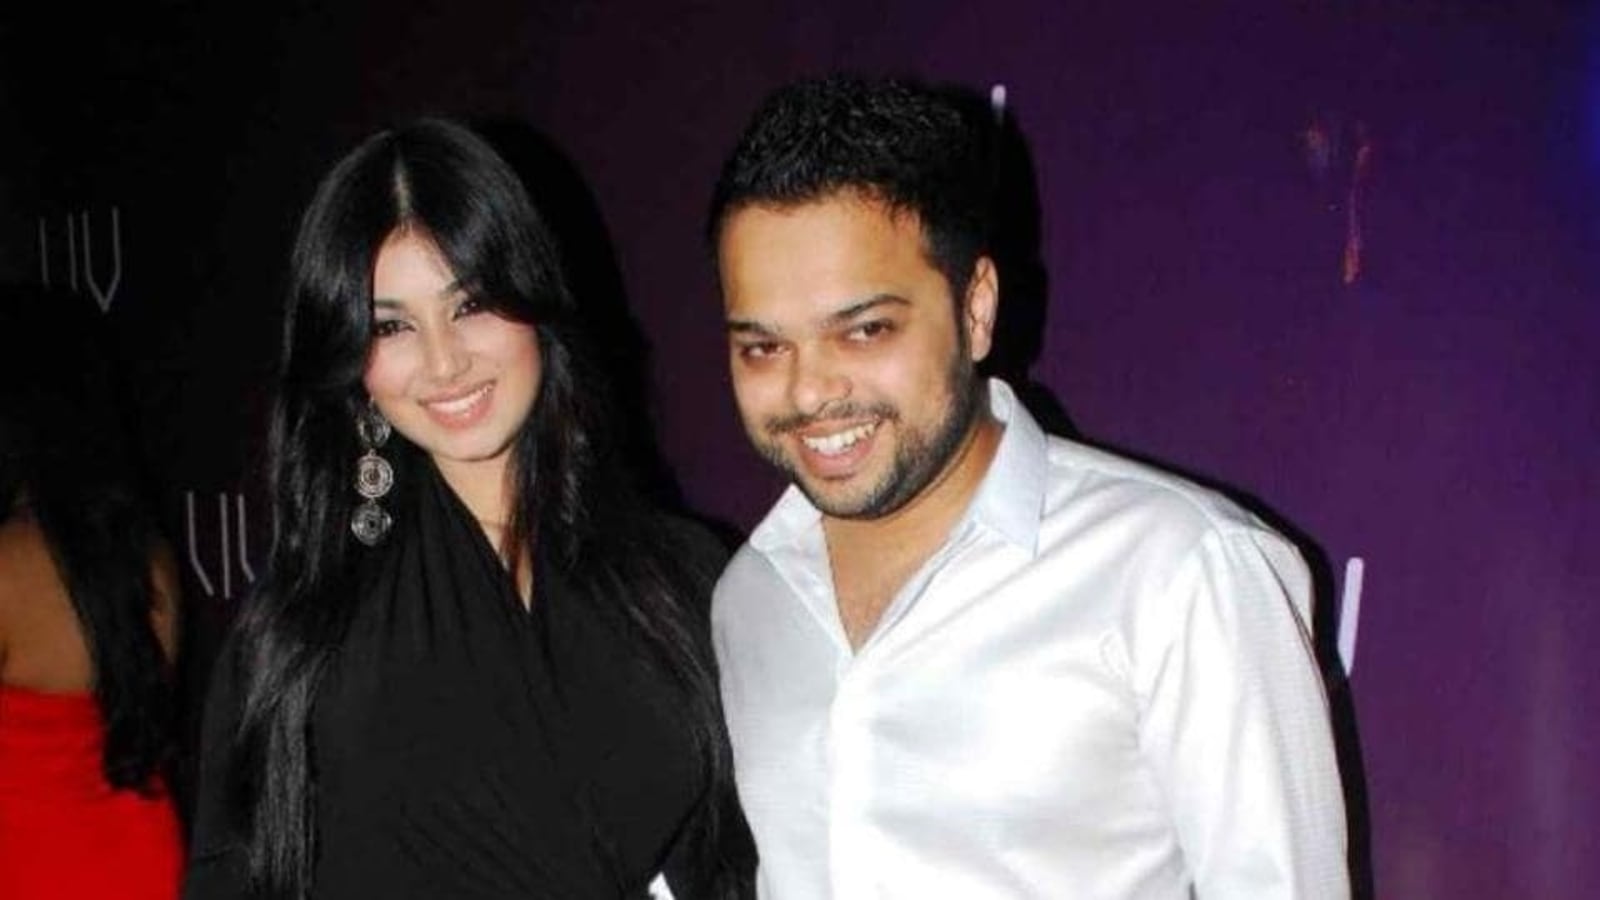 Ayesha Takia Xvidro - Ayesha Takia's husband alleges racism, 'dirty sexual comment' at Goa  airport | Bollywood - Hindustan Times